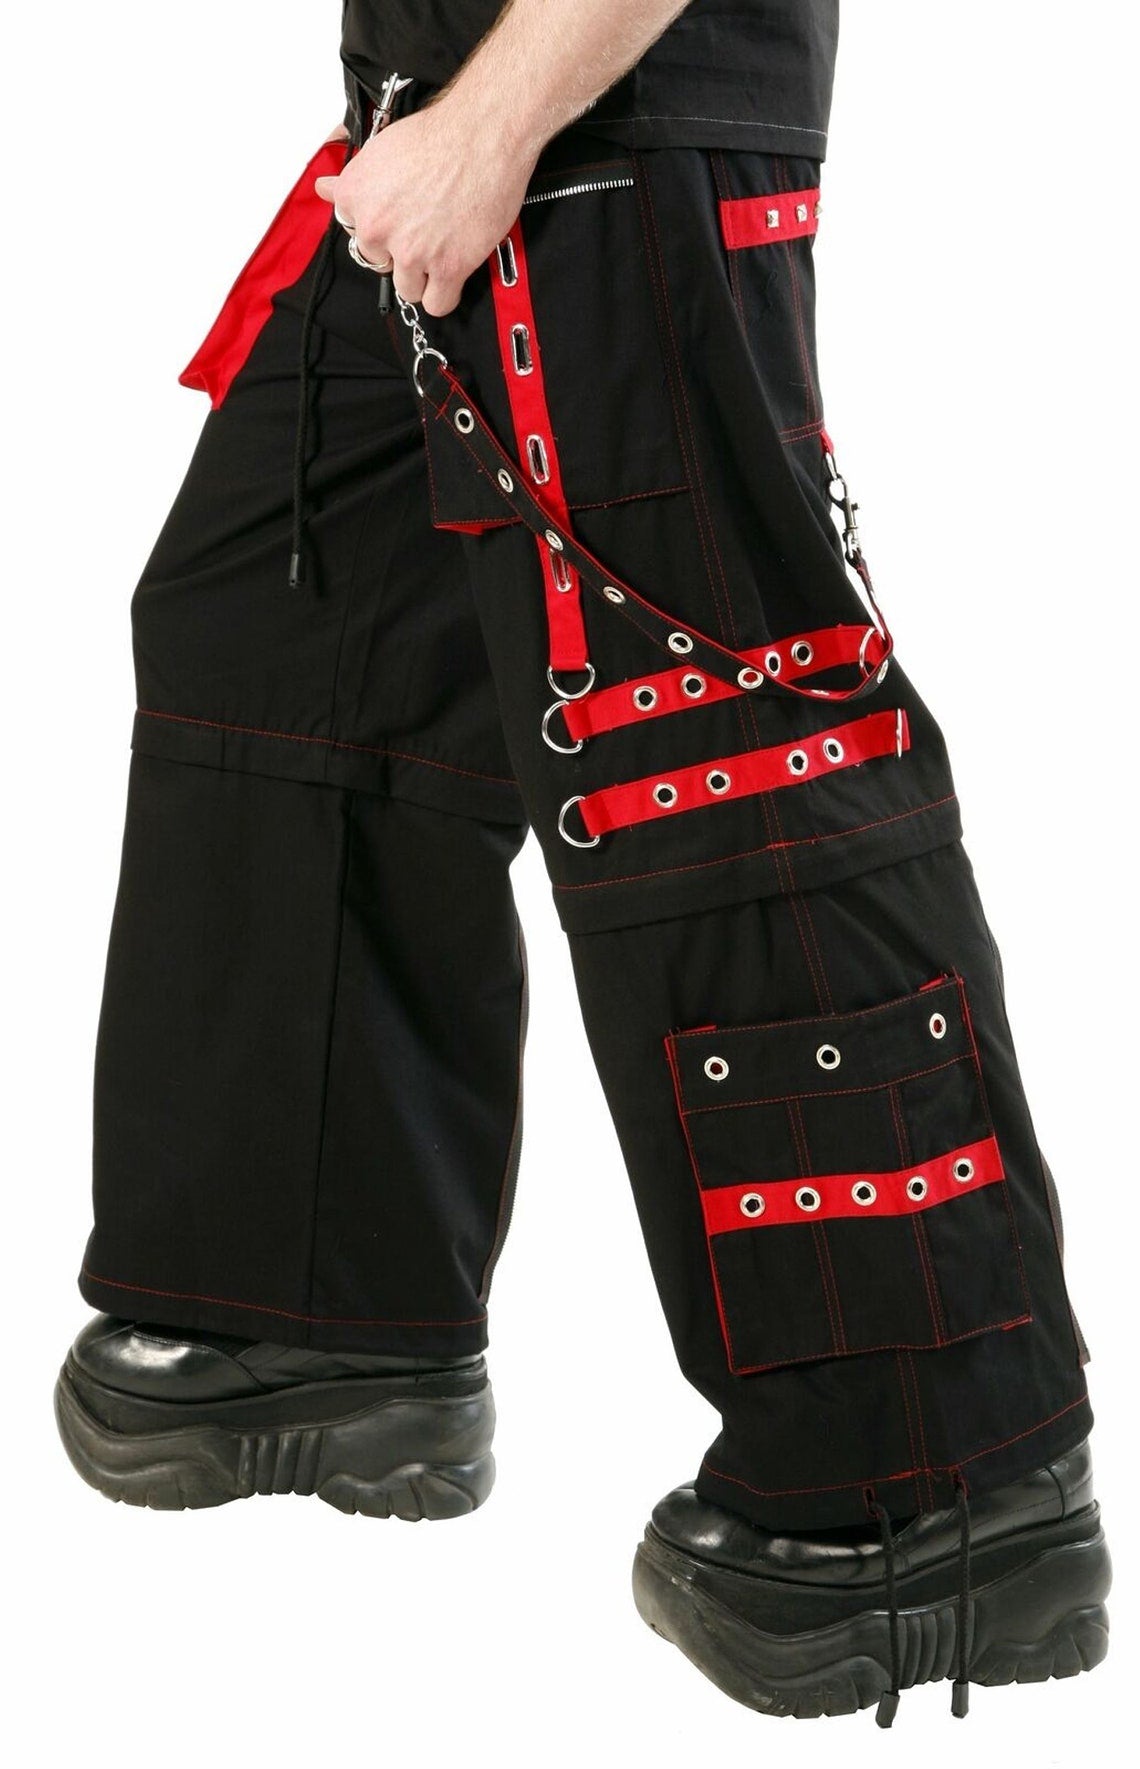 Gothic Pant, RED Super Skull Gothic Cyber Chain Goth Jeans Punk Rock Pants, Skull Gothic Pant